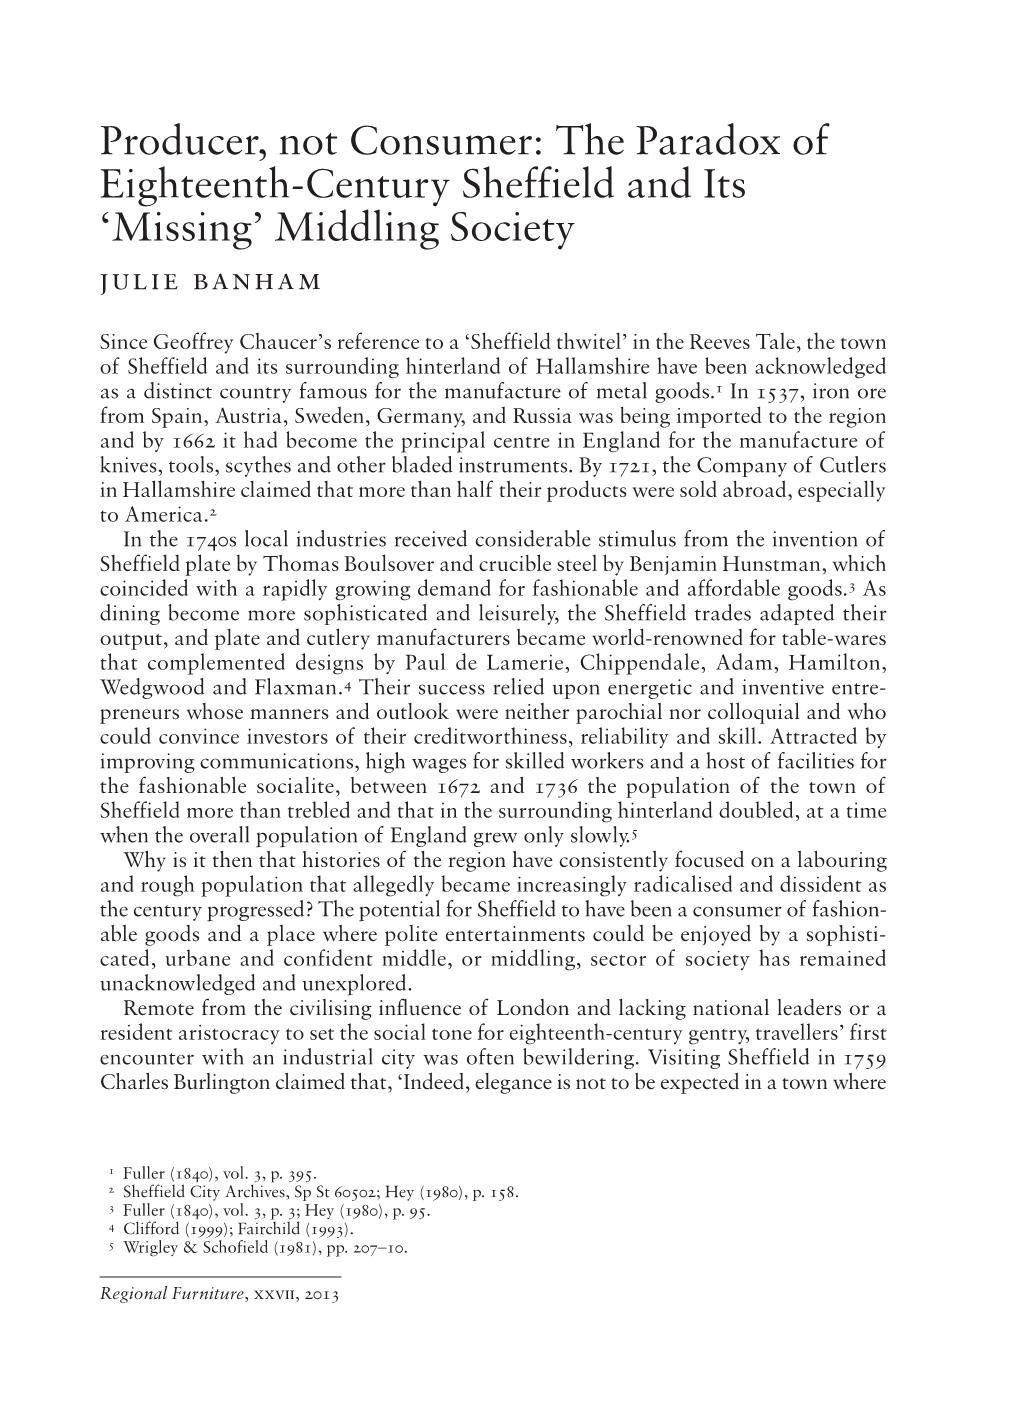 The Paradox of Eighteenth-Century Sheffield and Its ‘Missing’ Middling Society Julie Banham